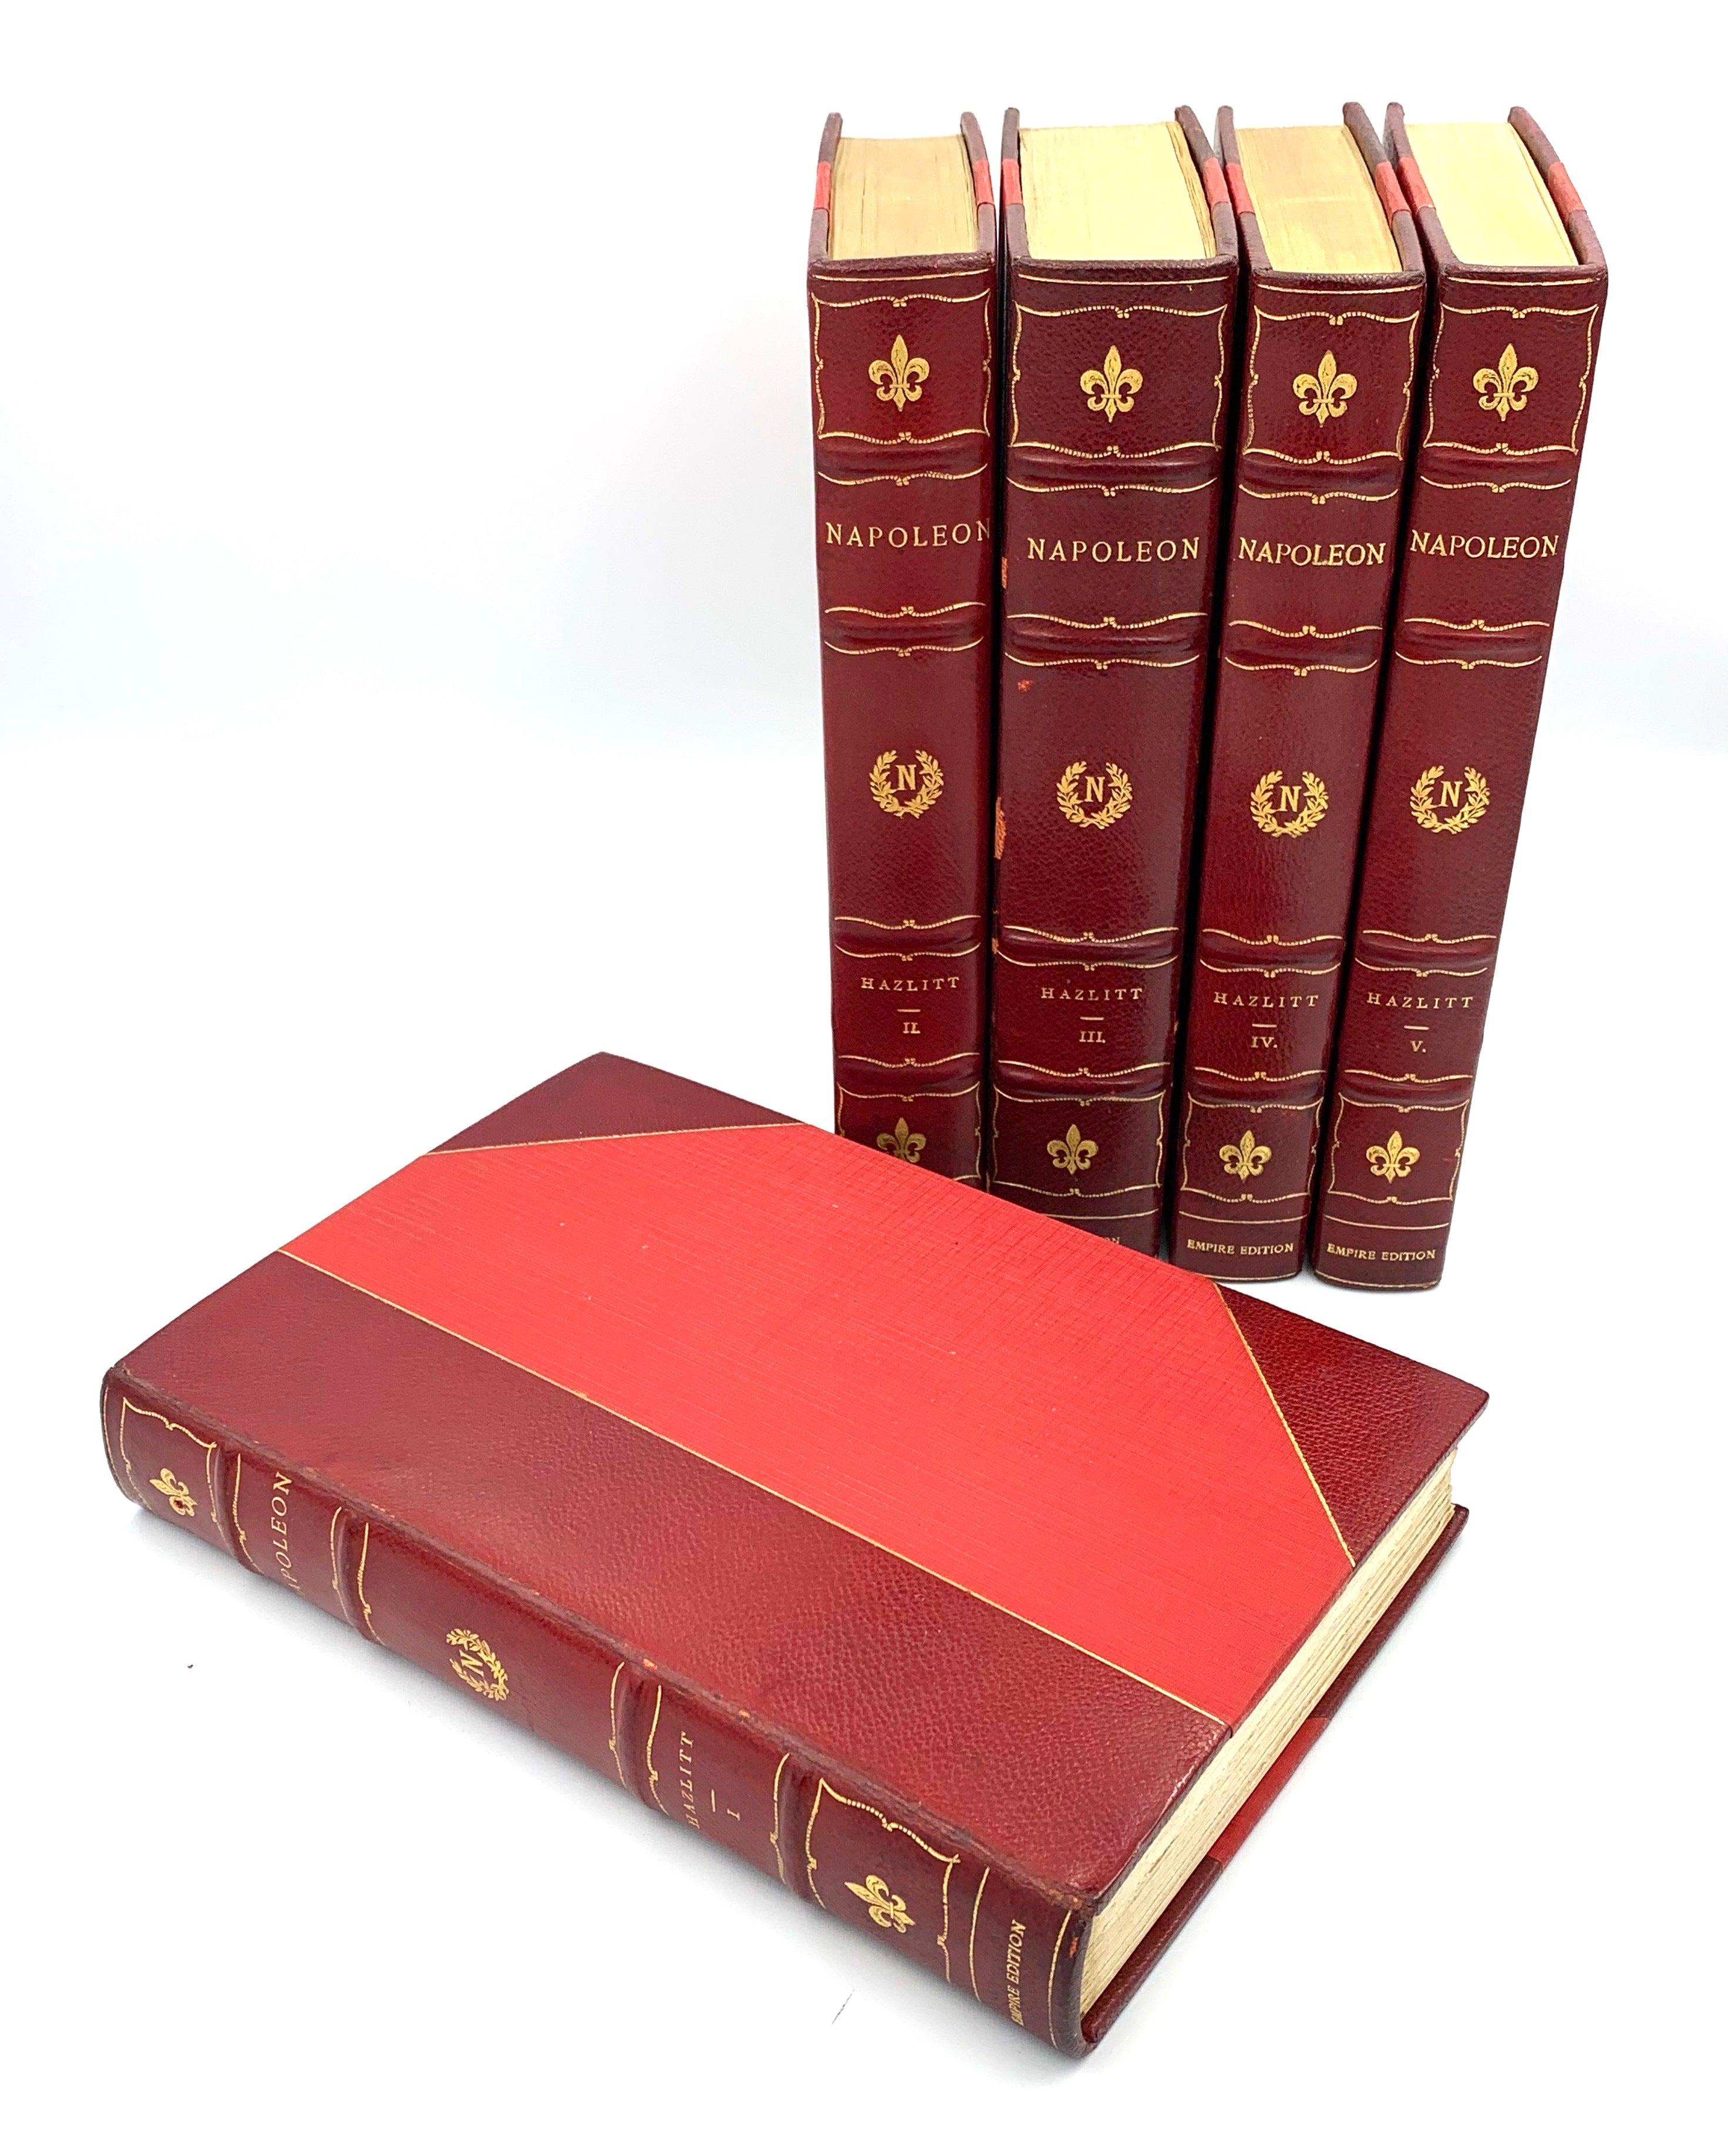 Hazlitt, William. The Life of Napoleon. New York: The Grolier Society, [c. 1900]. Empire Edition, no. 80 of 425 sets. Octavo. Five volumes. Illustrated throughout. Presented in 3/4 red Moroccan leather and red cloth boards with gilt titles, tooling,